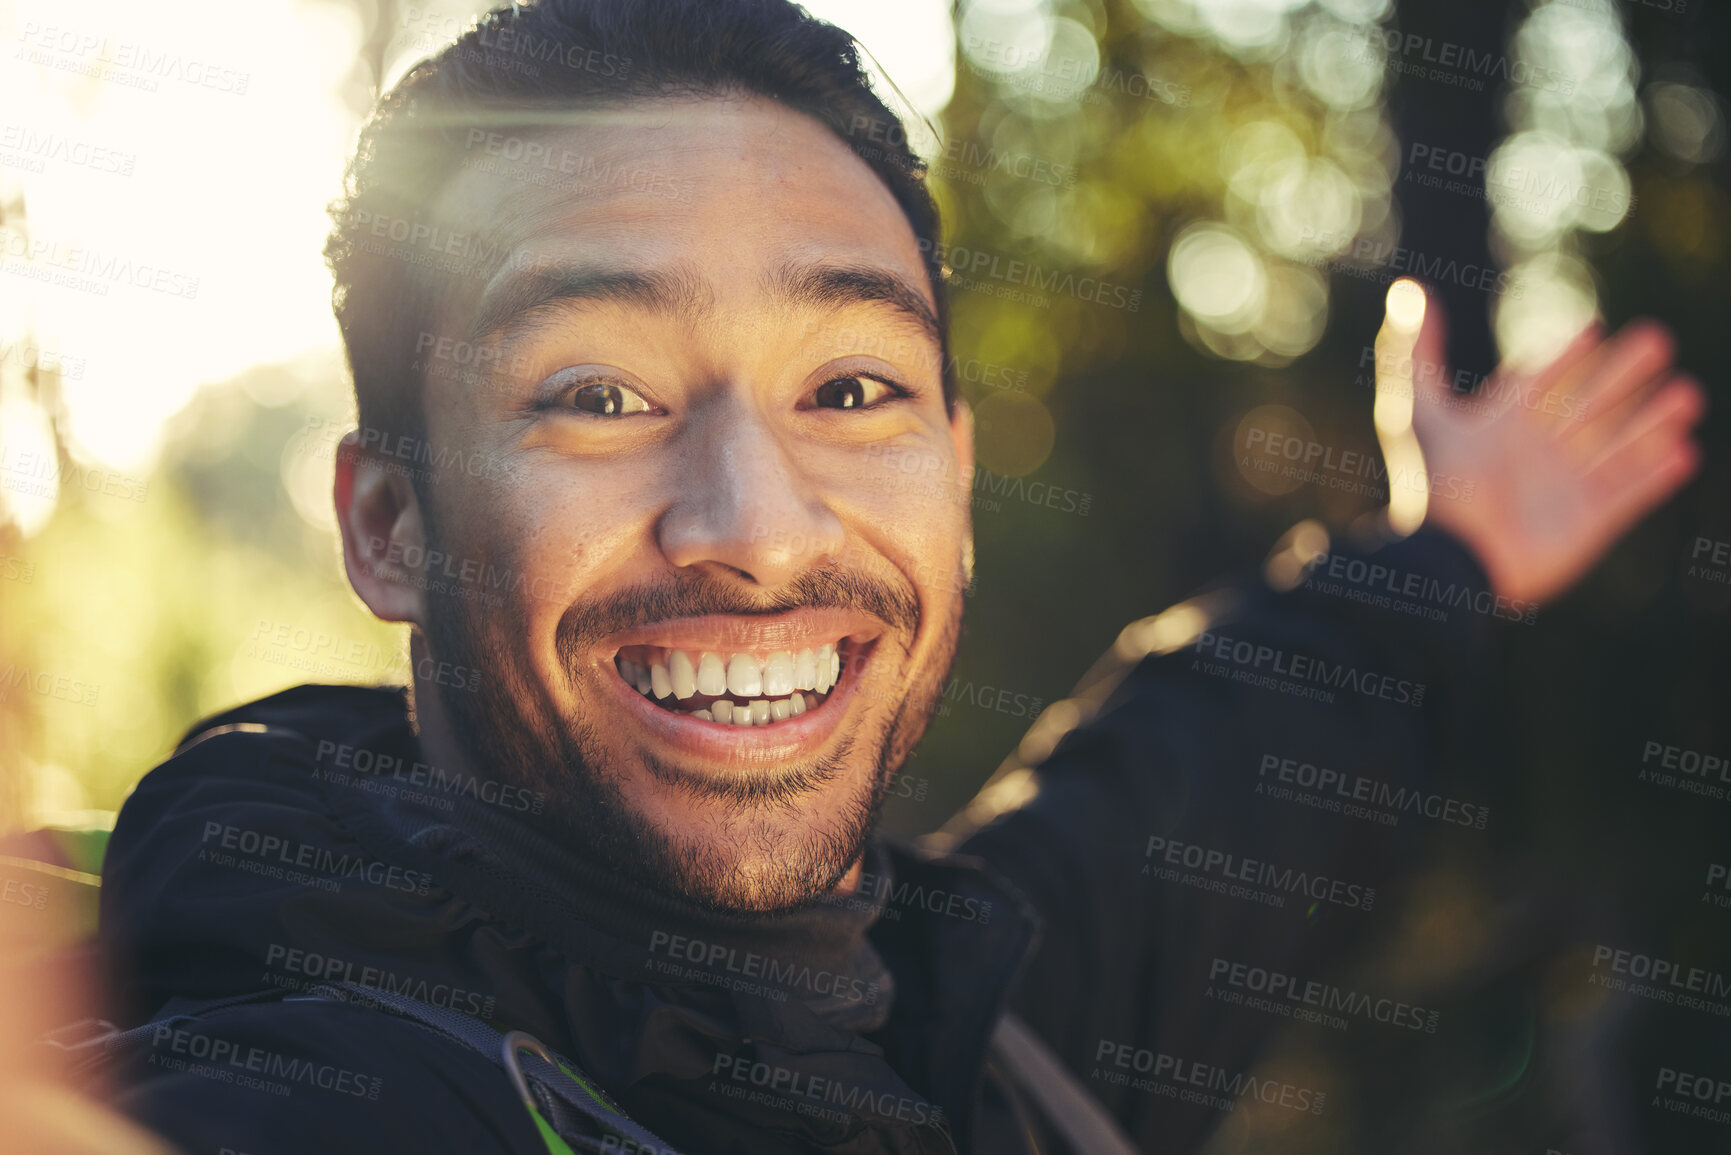 Buy stock photo Hiking man, portrait or selfie in forest, nature woods or trees environment for travel blog, social media or profile picture. Smile, happy or hiker face in photography for Japanese fitness influencer